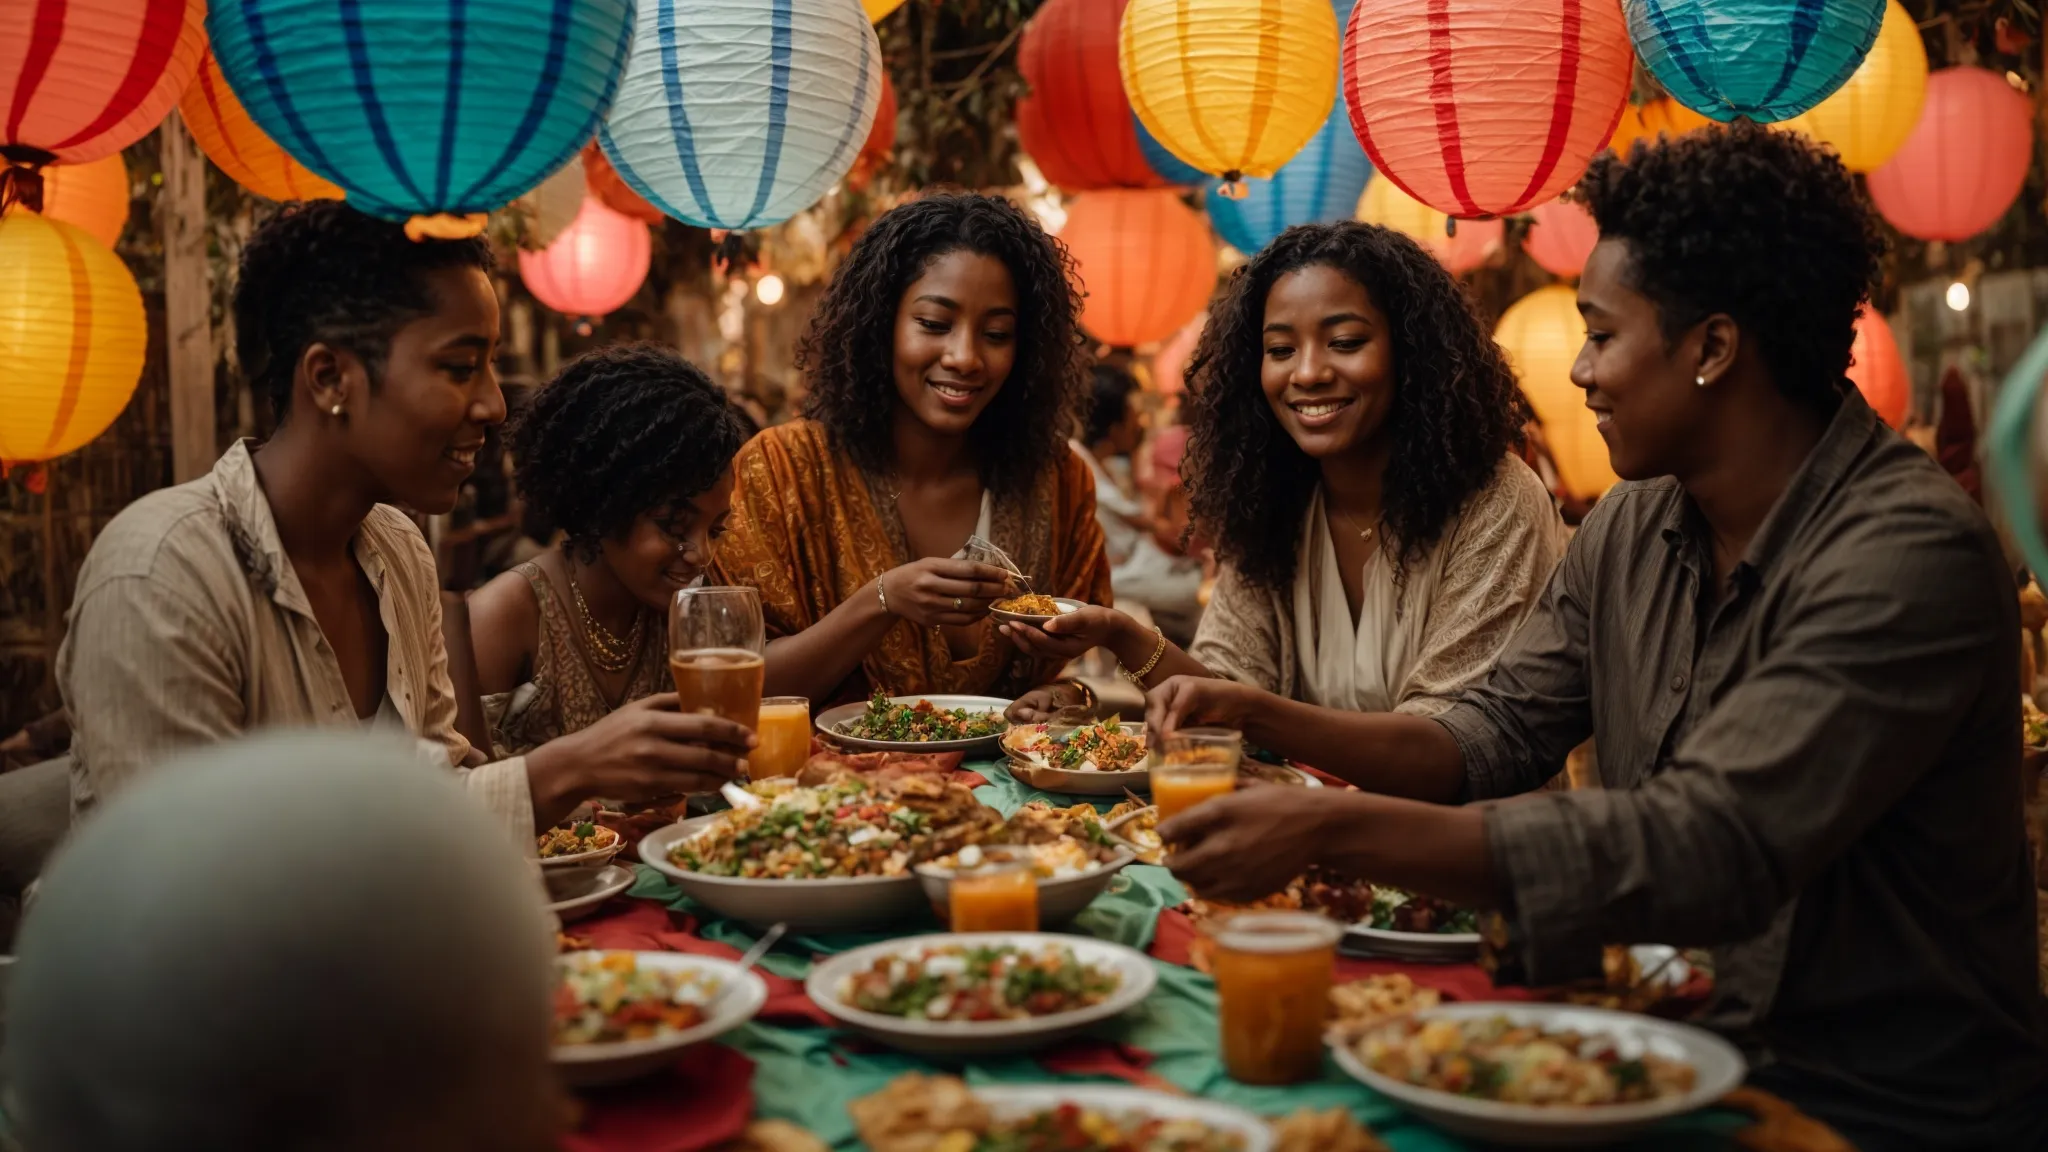 diverse group of people from different cultural backgrounds sharing a meal around a large table under colorful paper lanterns.